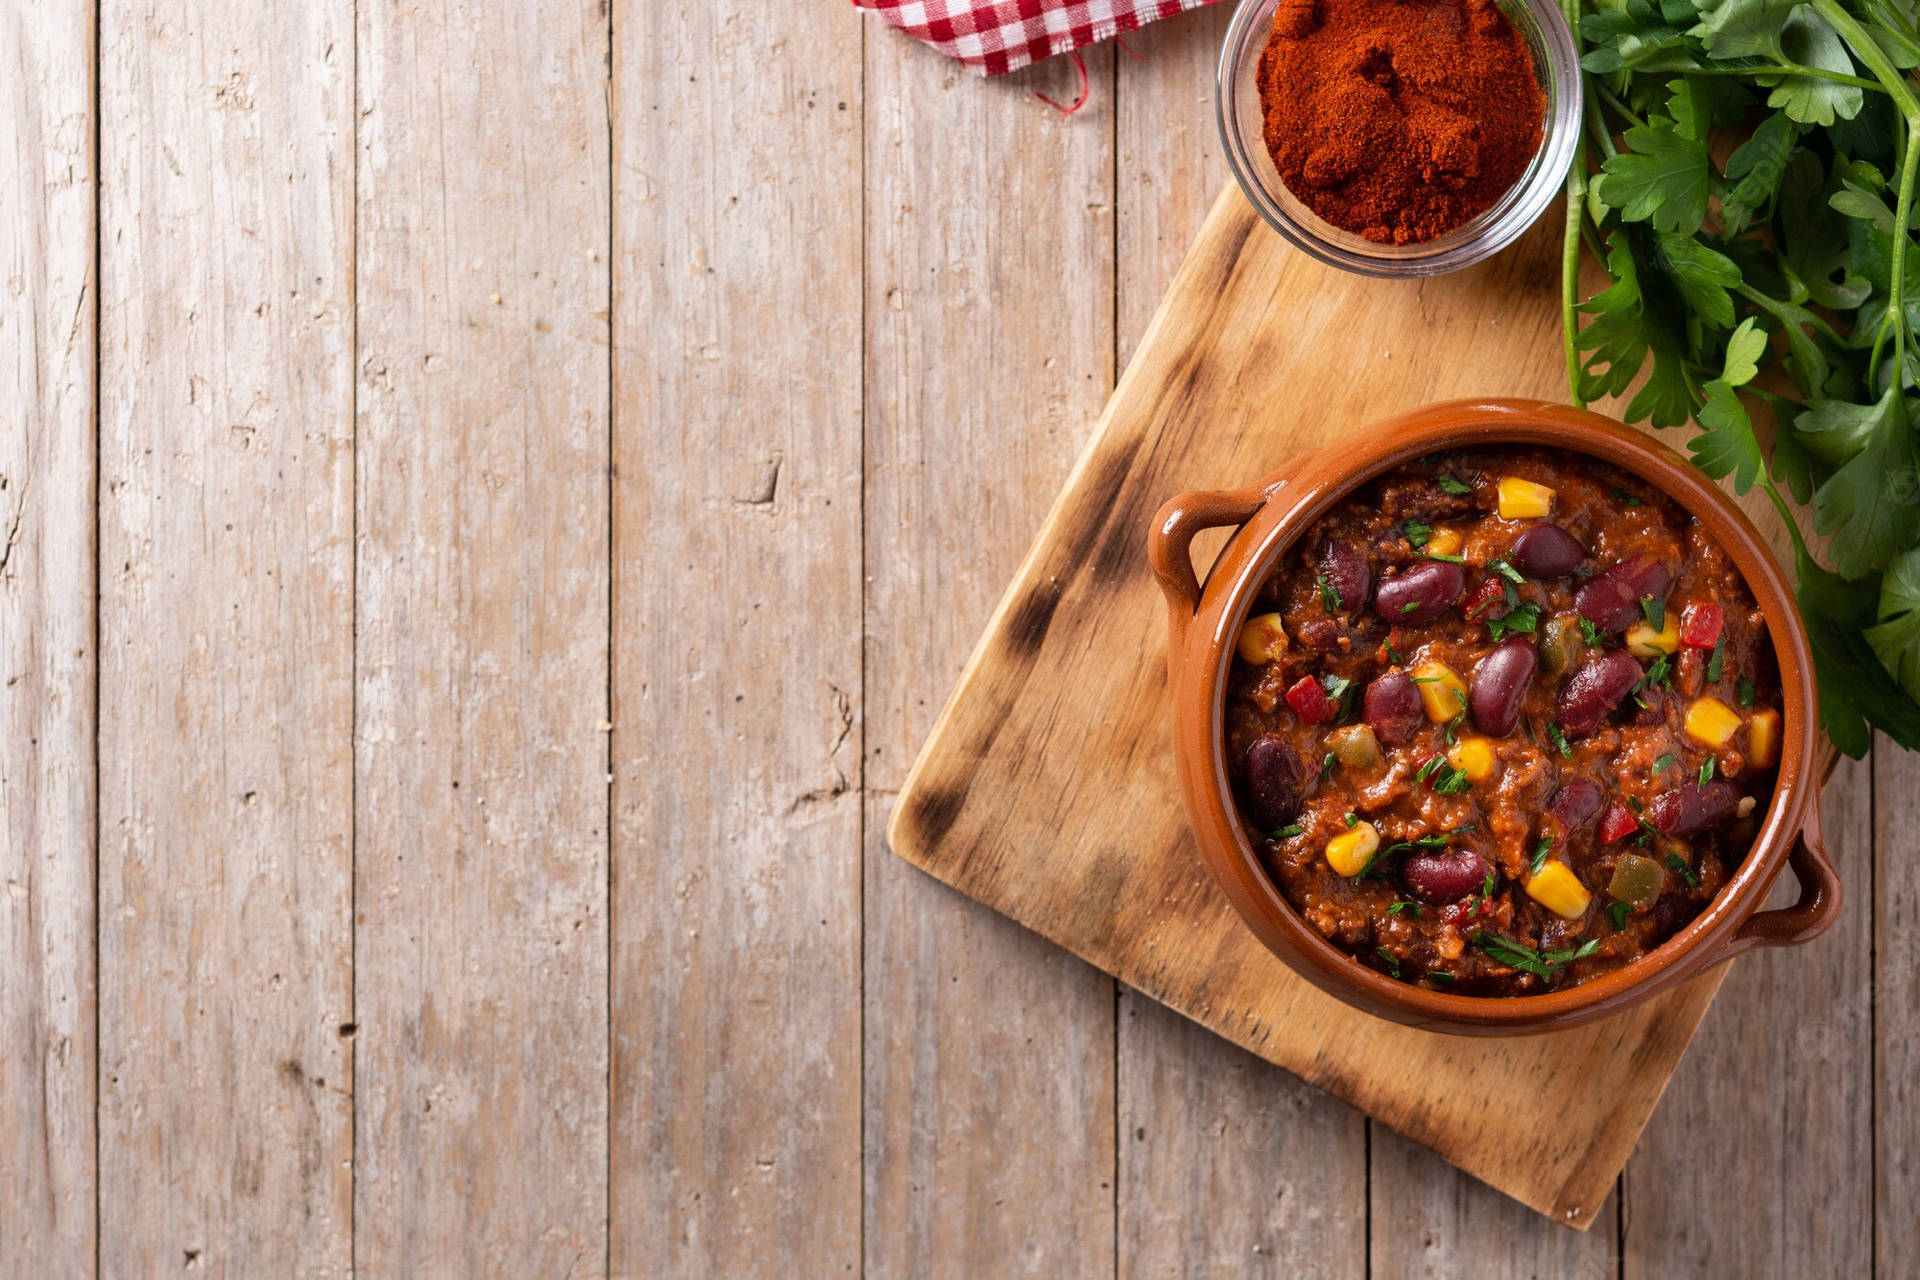 Savory and Spicy Bowl of Chili Con Carne Wallpaper